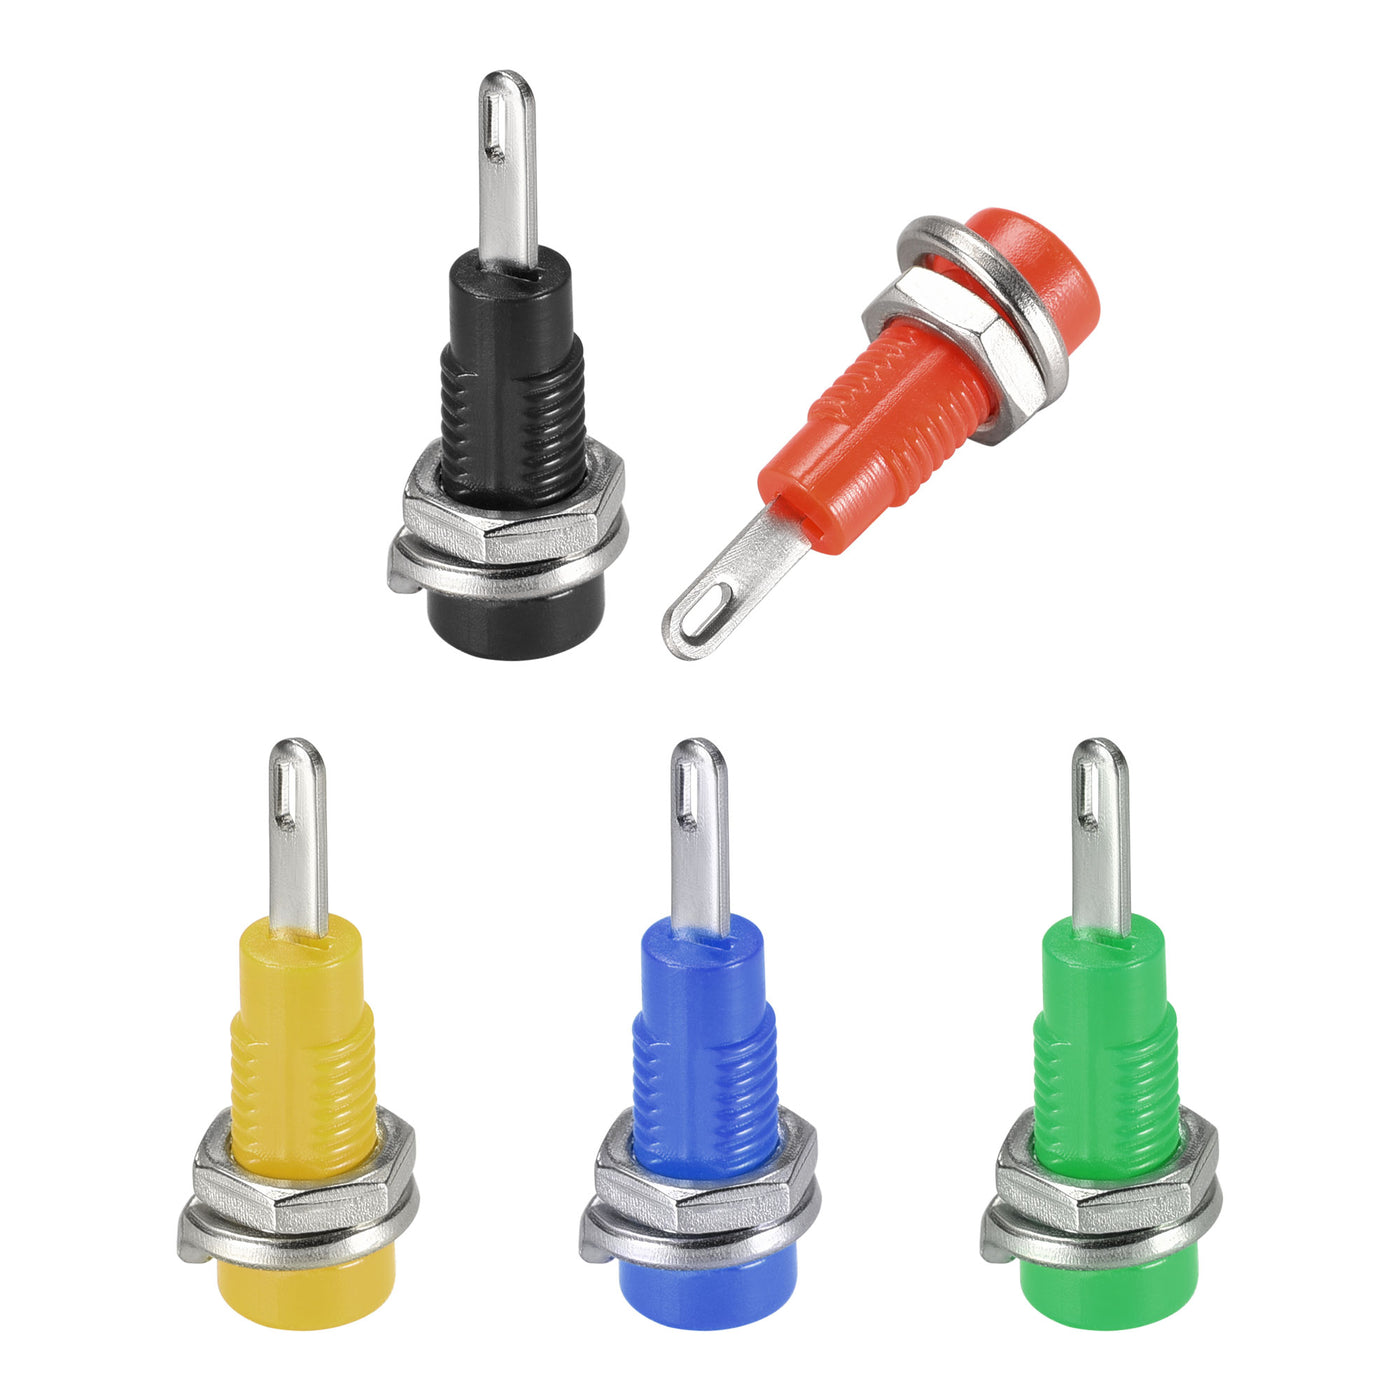 uxcell Uxcell 10pcs, 2mm Banana Jack Binding Post Female Socket Plug Terminal Connector for Loudspeaker Amplifier, Red Black Blue Green Yellow